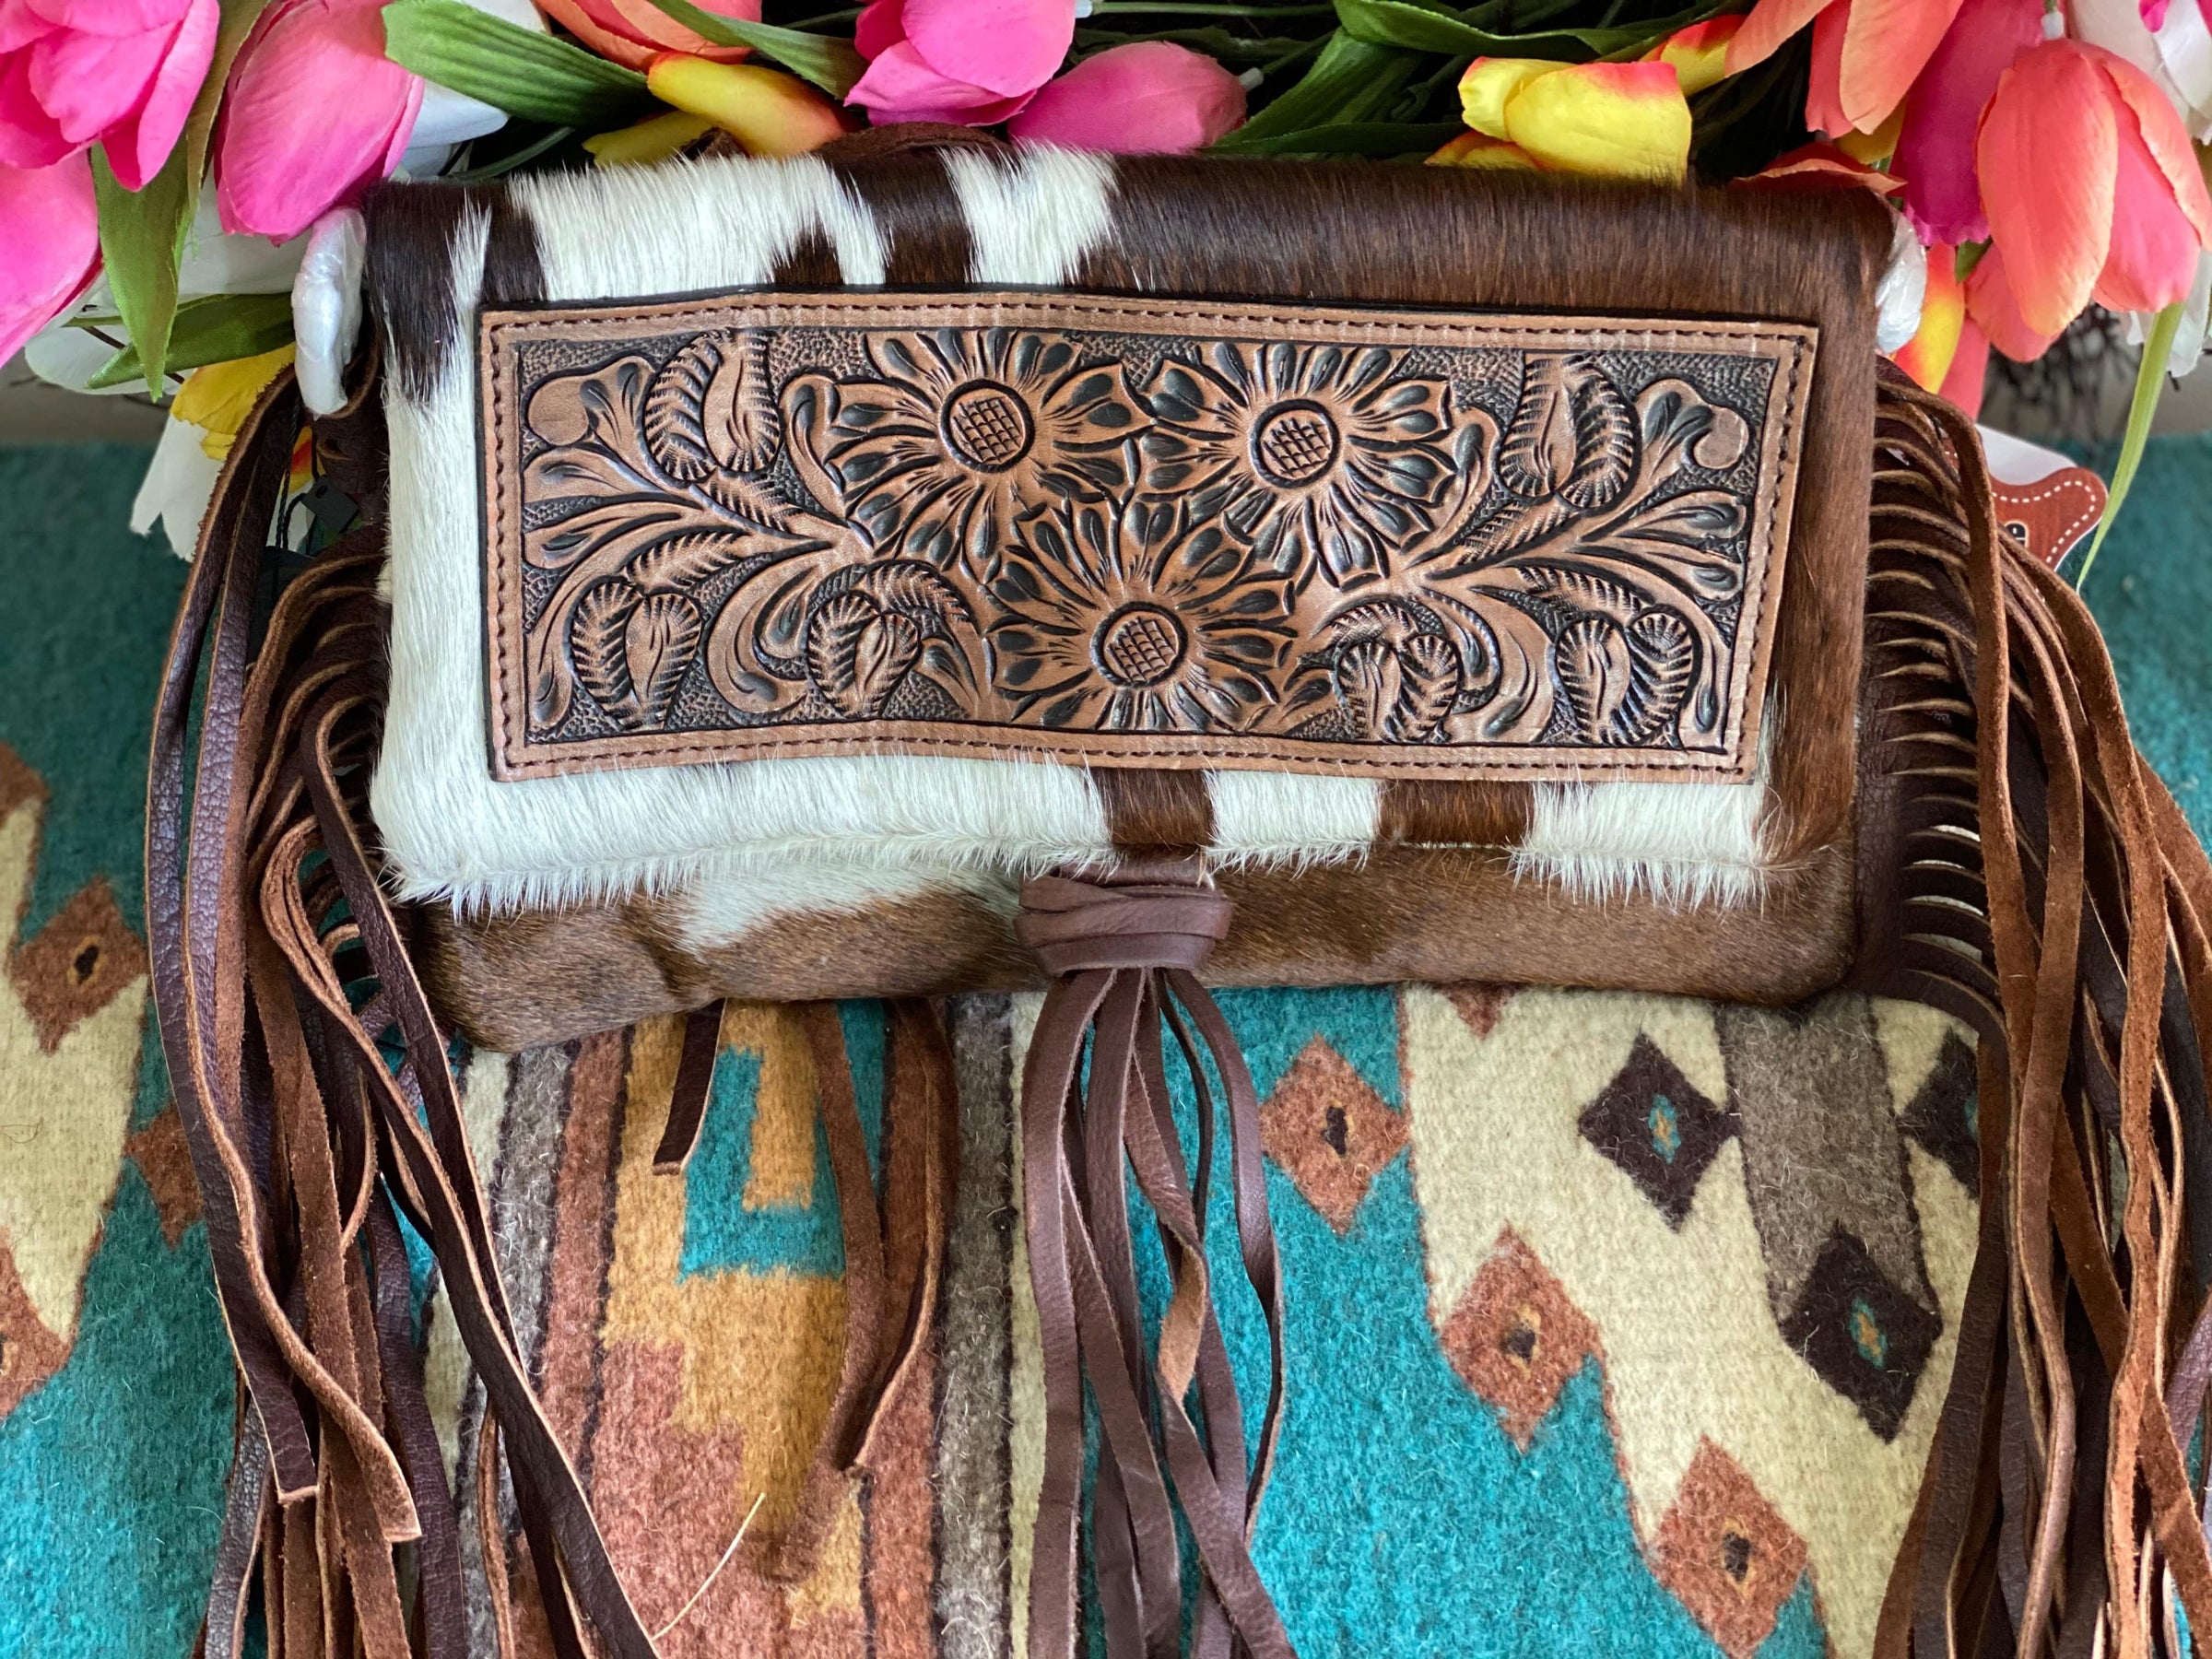 The Gambler Cowhide Fringe Purse LIMITED EDITION by Countryside Co.